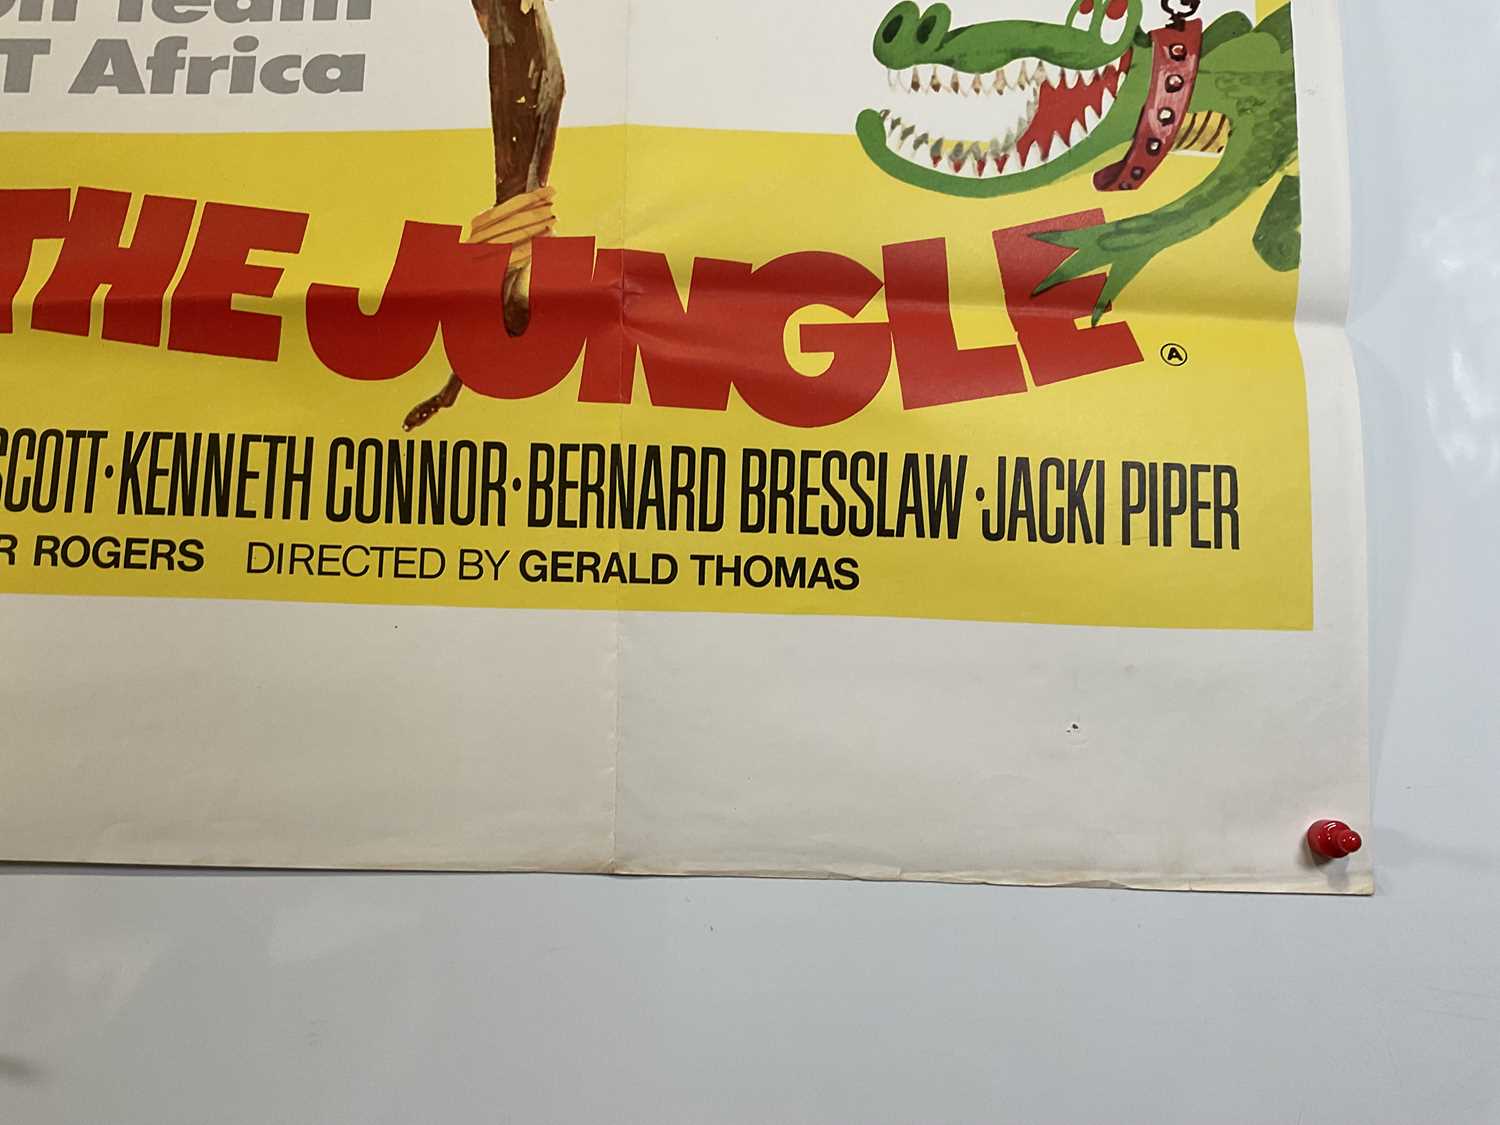 CARRY ON UP THE JUNGLE (1970) UK Quad film poster featuring Renato Fratini artwork, folded. - Image 5 of 6